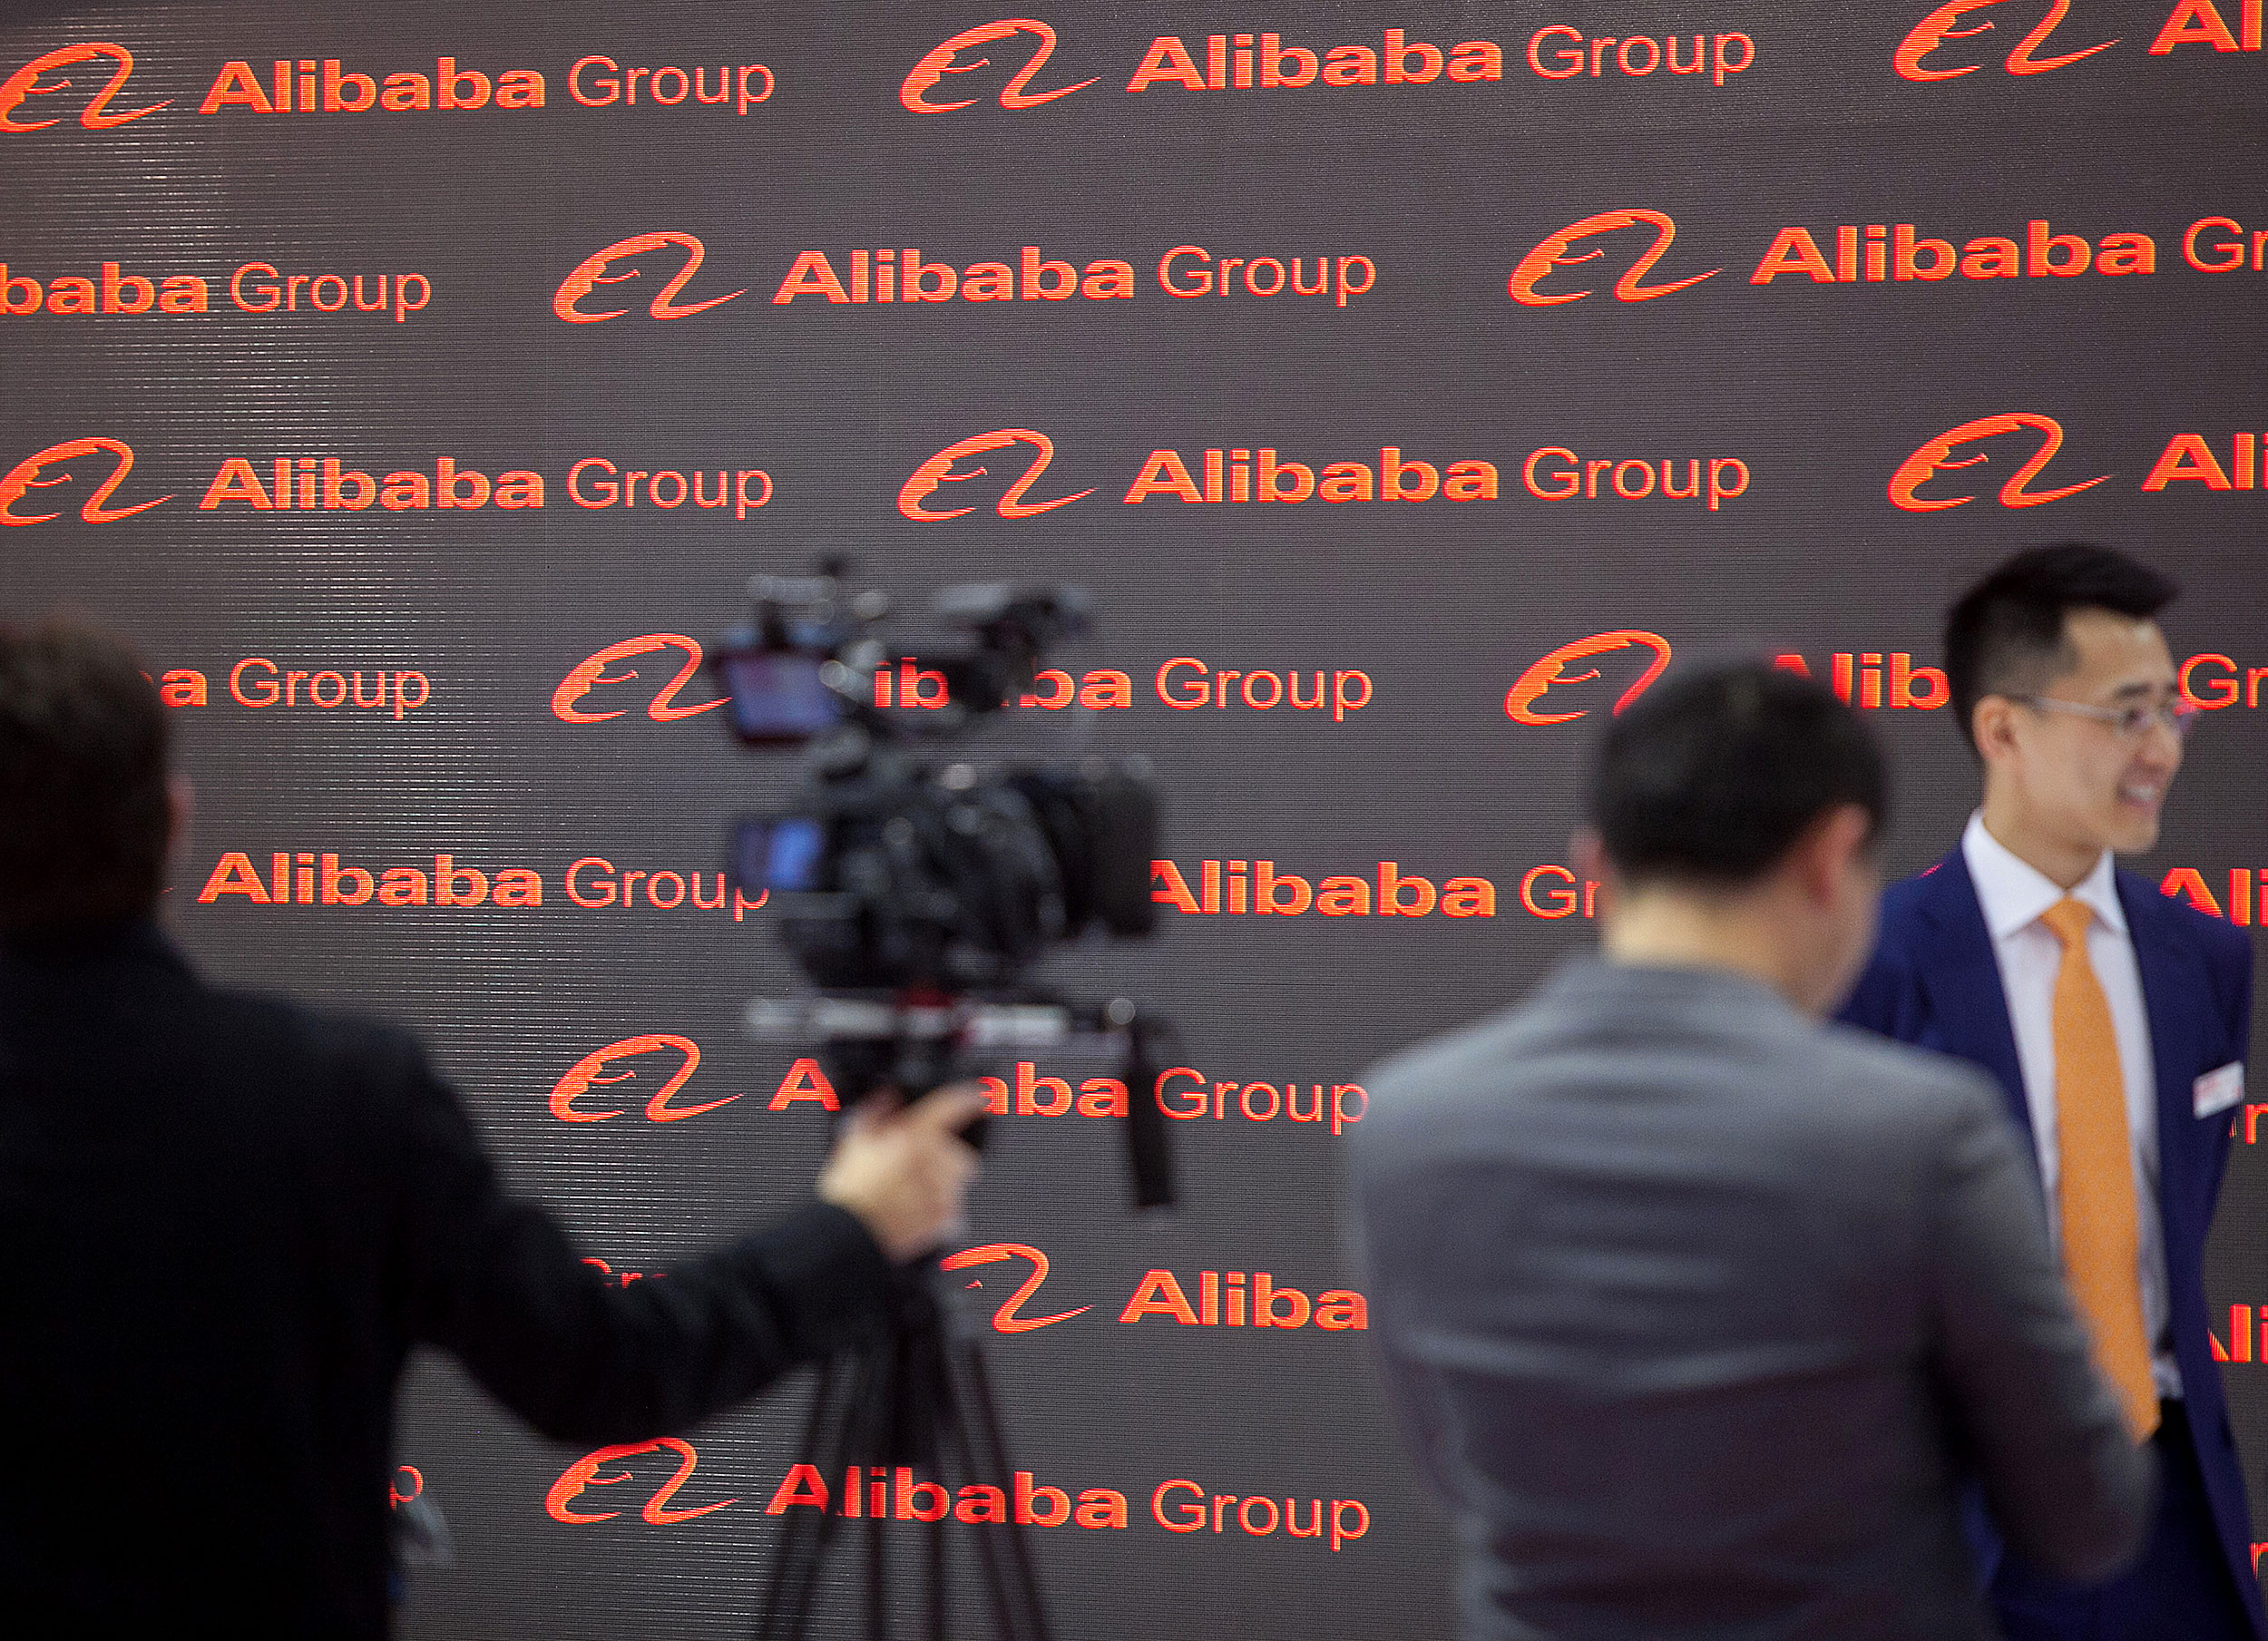 The Alibaba Group Holding Ltd exhibition space at the CeBit tech show in Hanover, Germany, on March 16, 2015.
